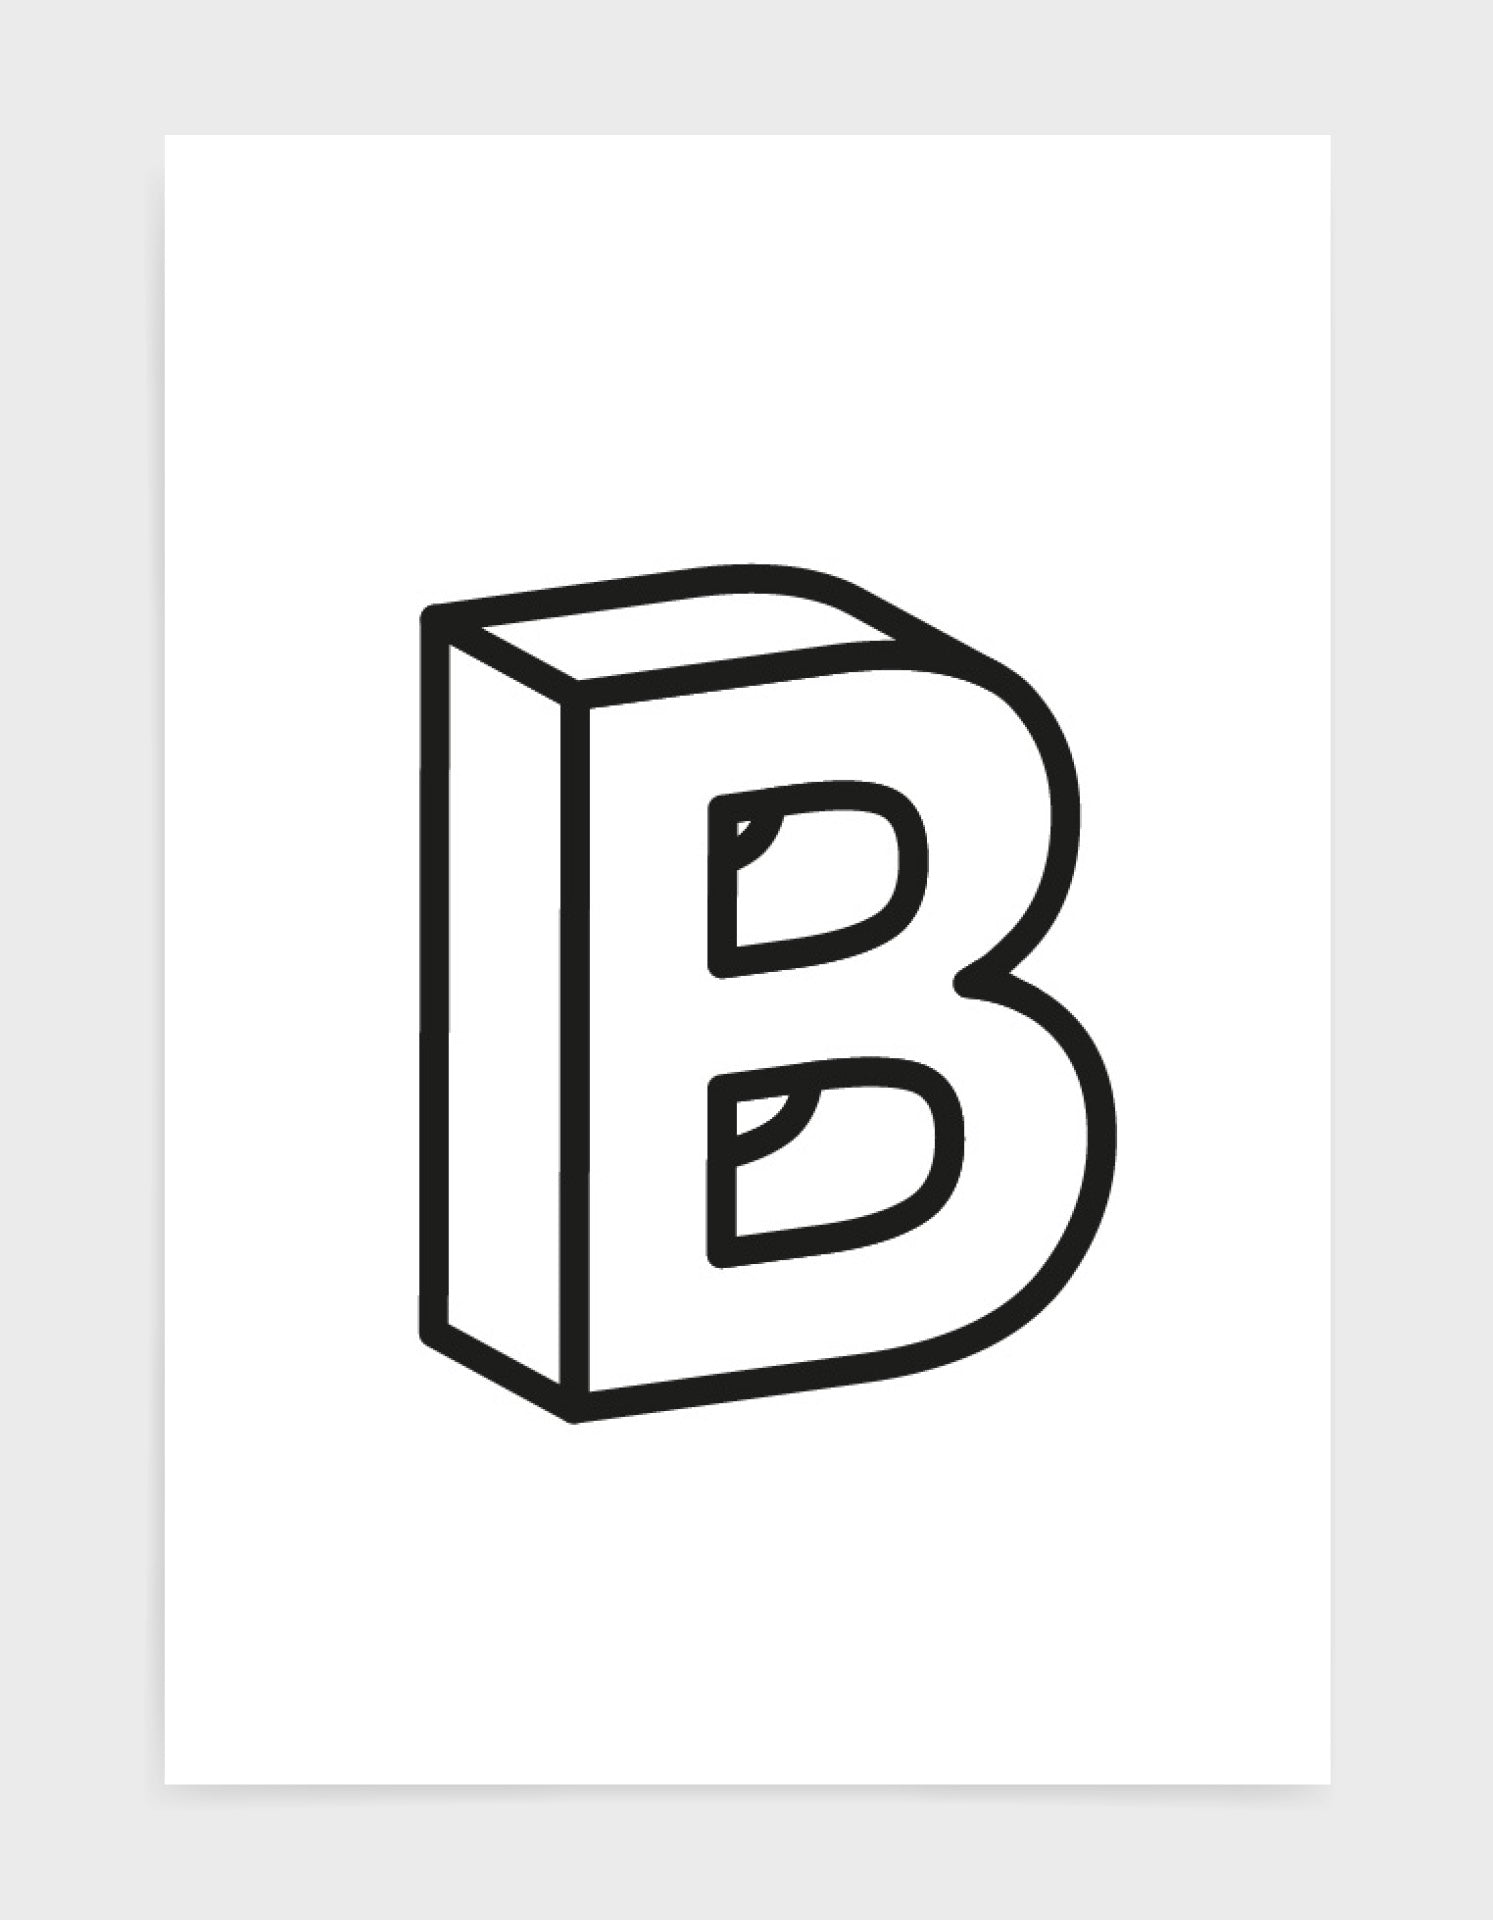 monochrome typography alphabet print depicting the letter B in 3D black type